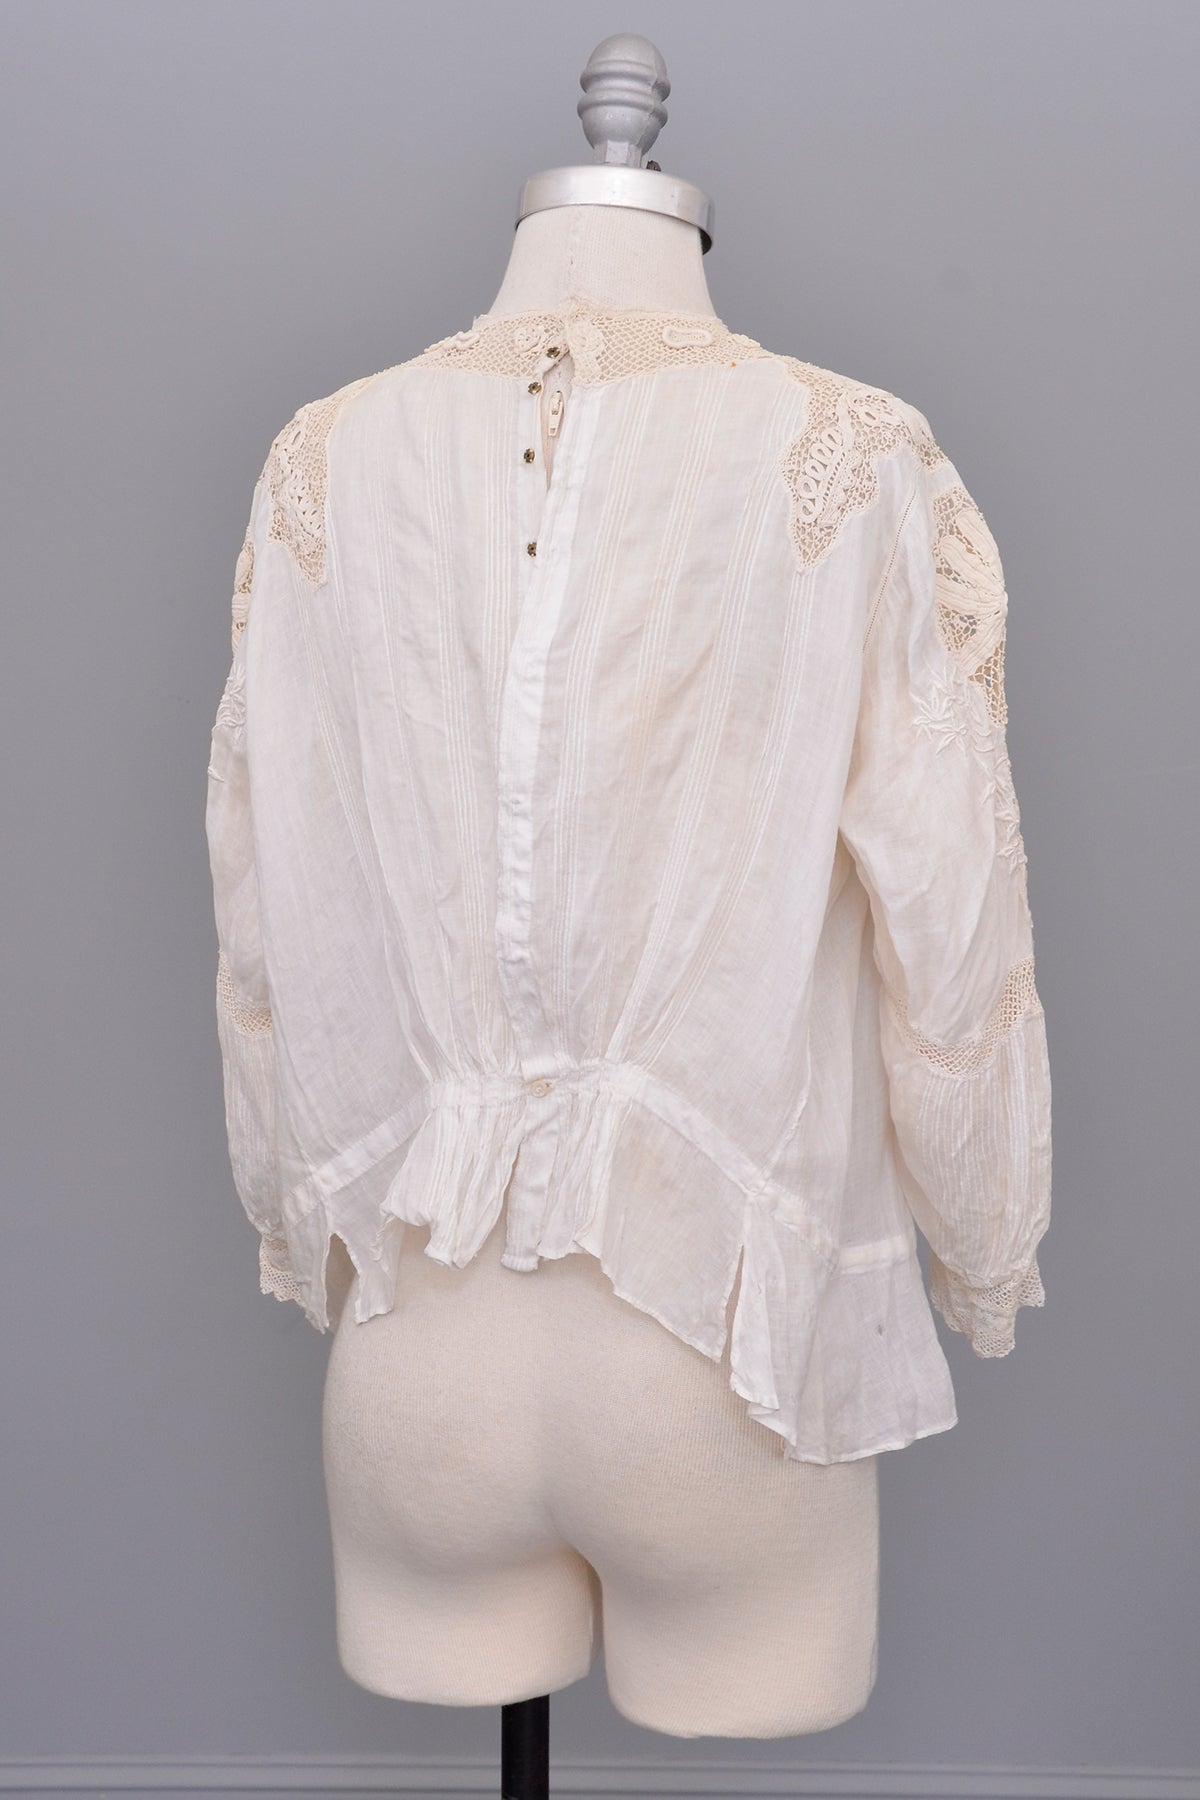 Edwardian White Blouse with Crochet and Embroidery | Restoration neede ...